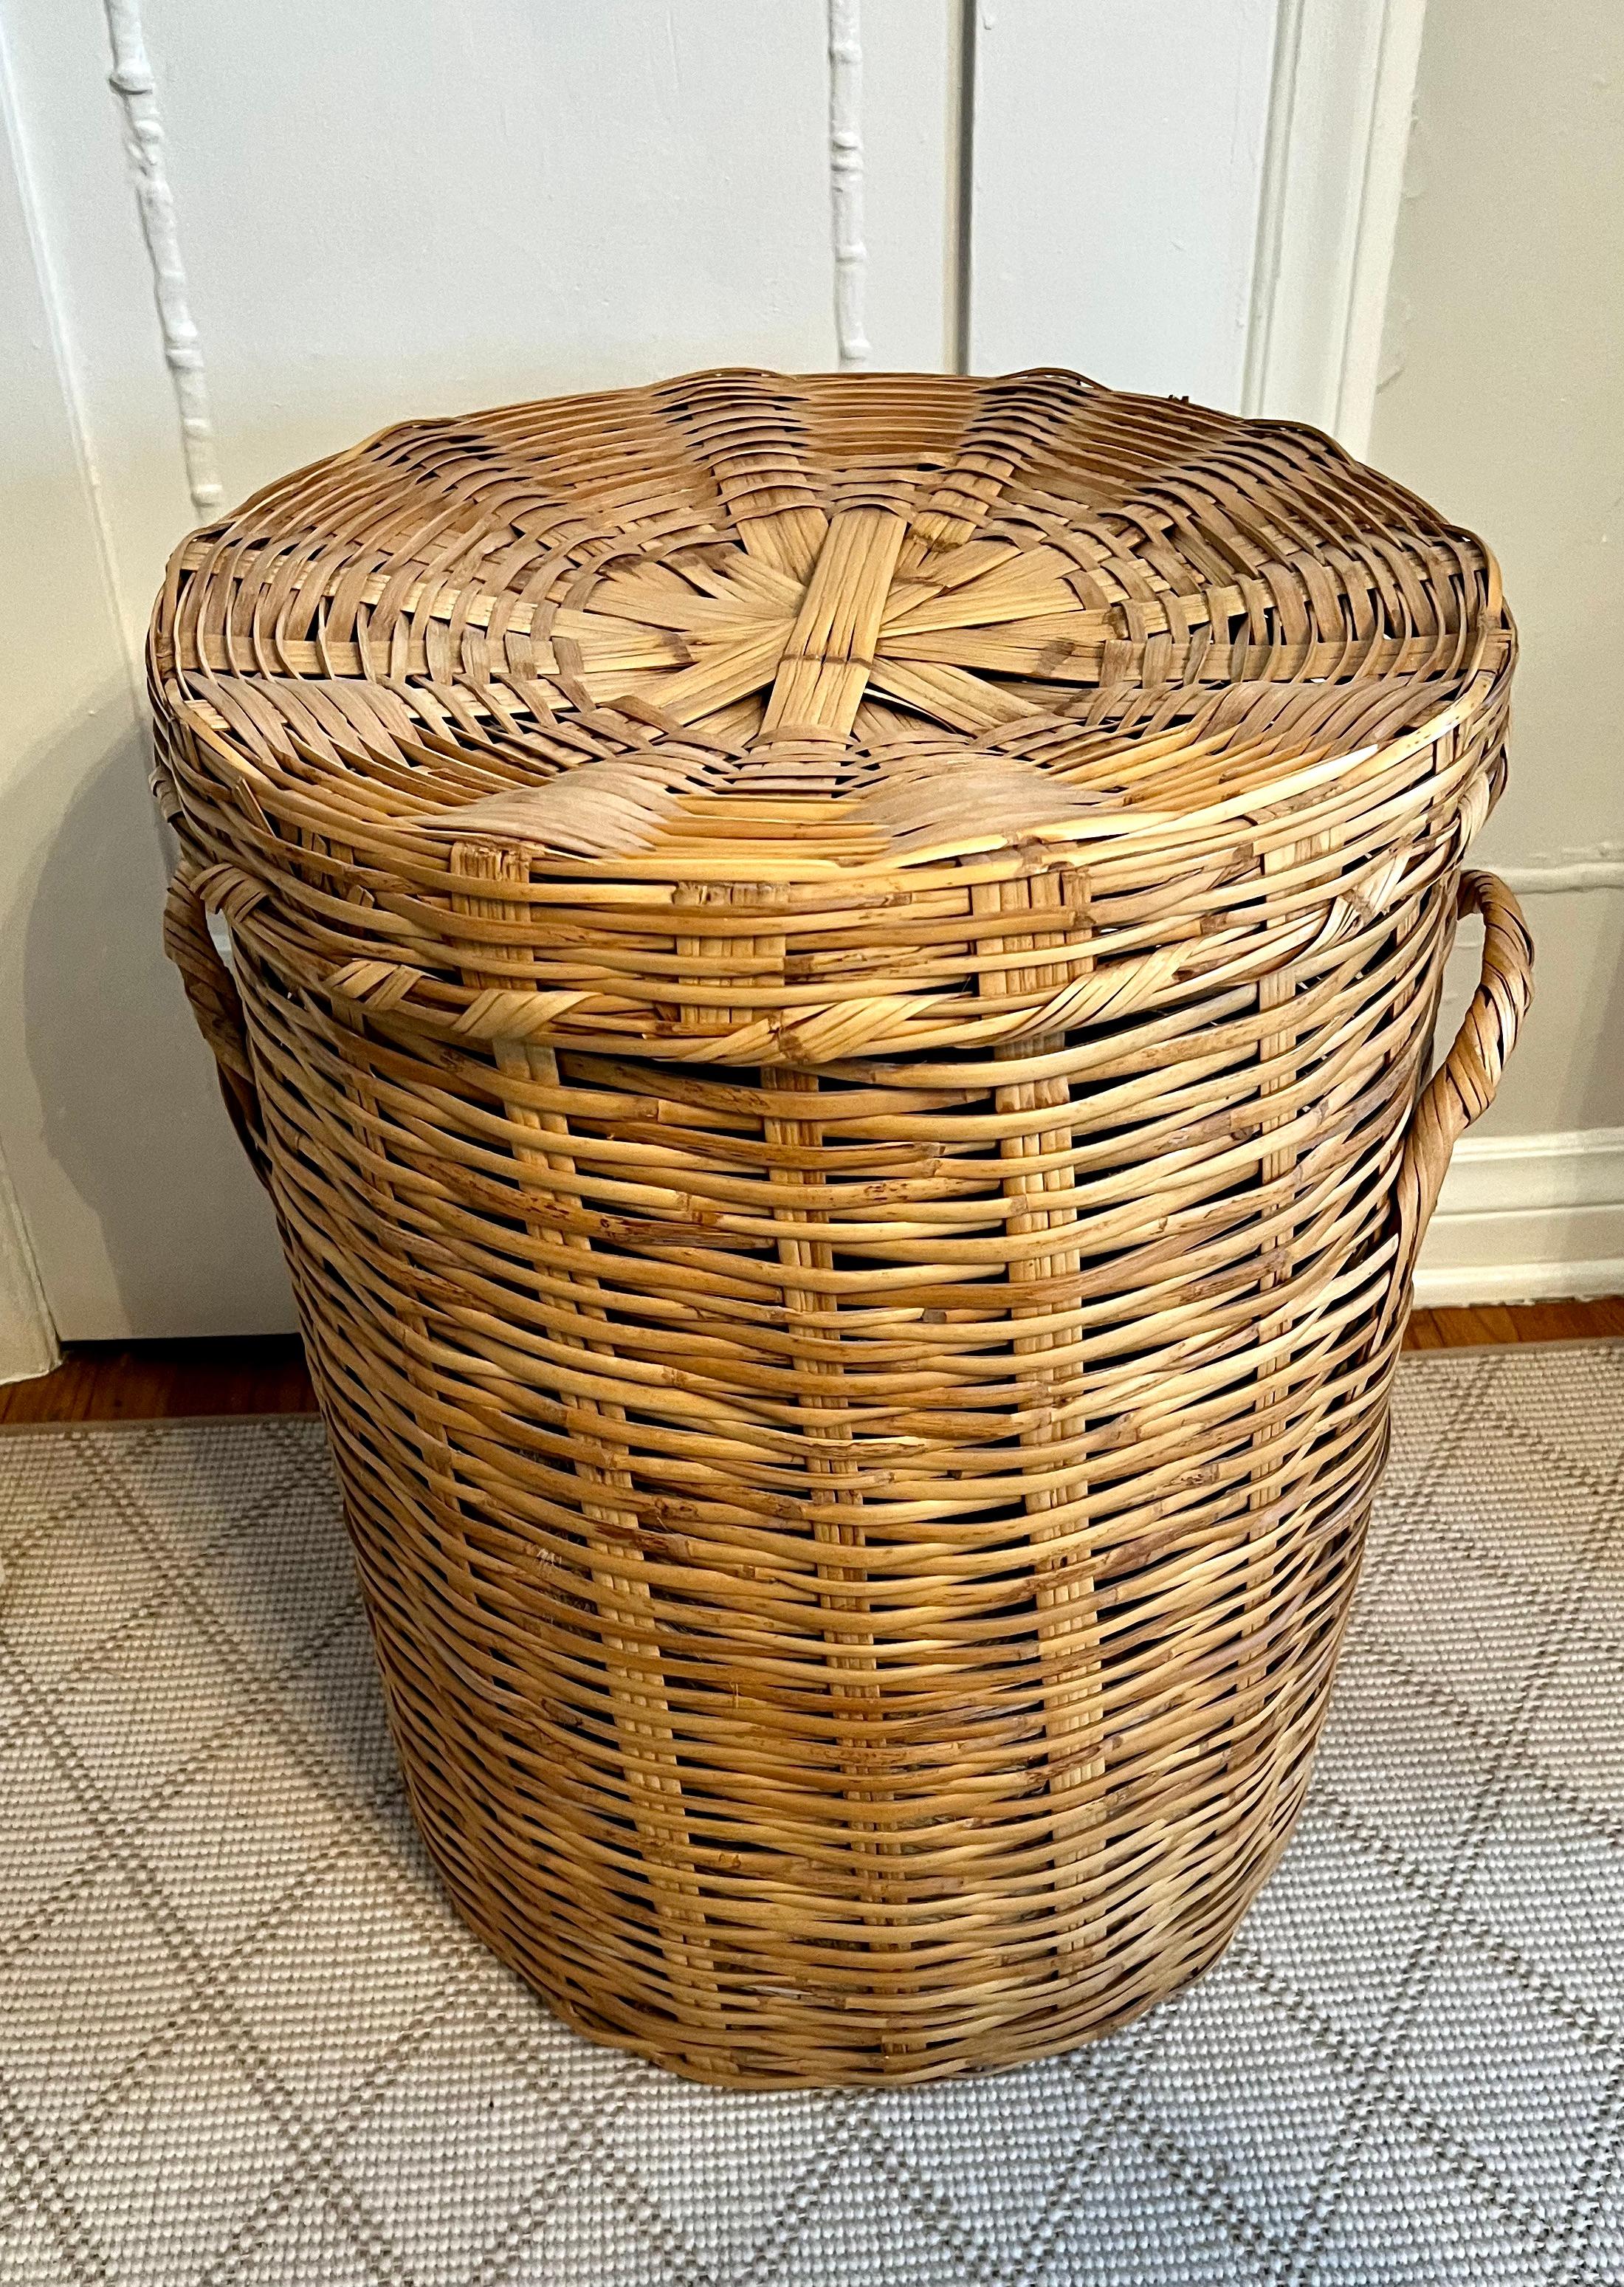 A lovely woven basket - a nice decorative piece or can be used for laundry or rags?  the piece is woven and great for occasional use.   Strong enough for linens, but we would not suggest wood or kindling as the weaving is not tightened enough to